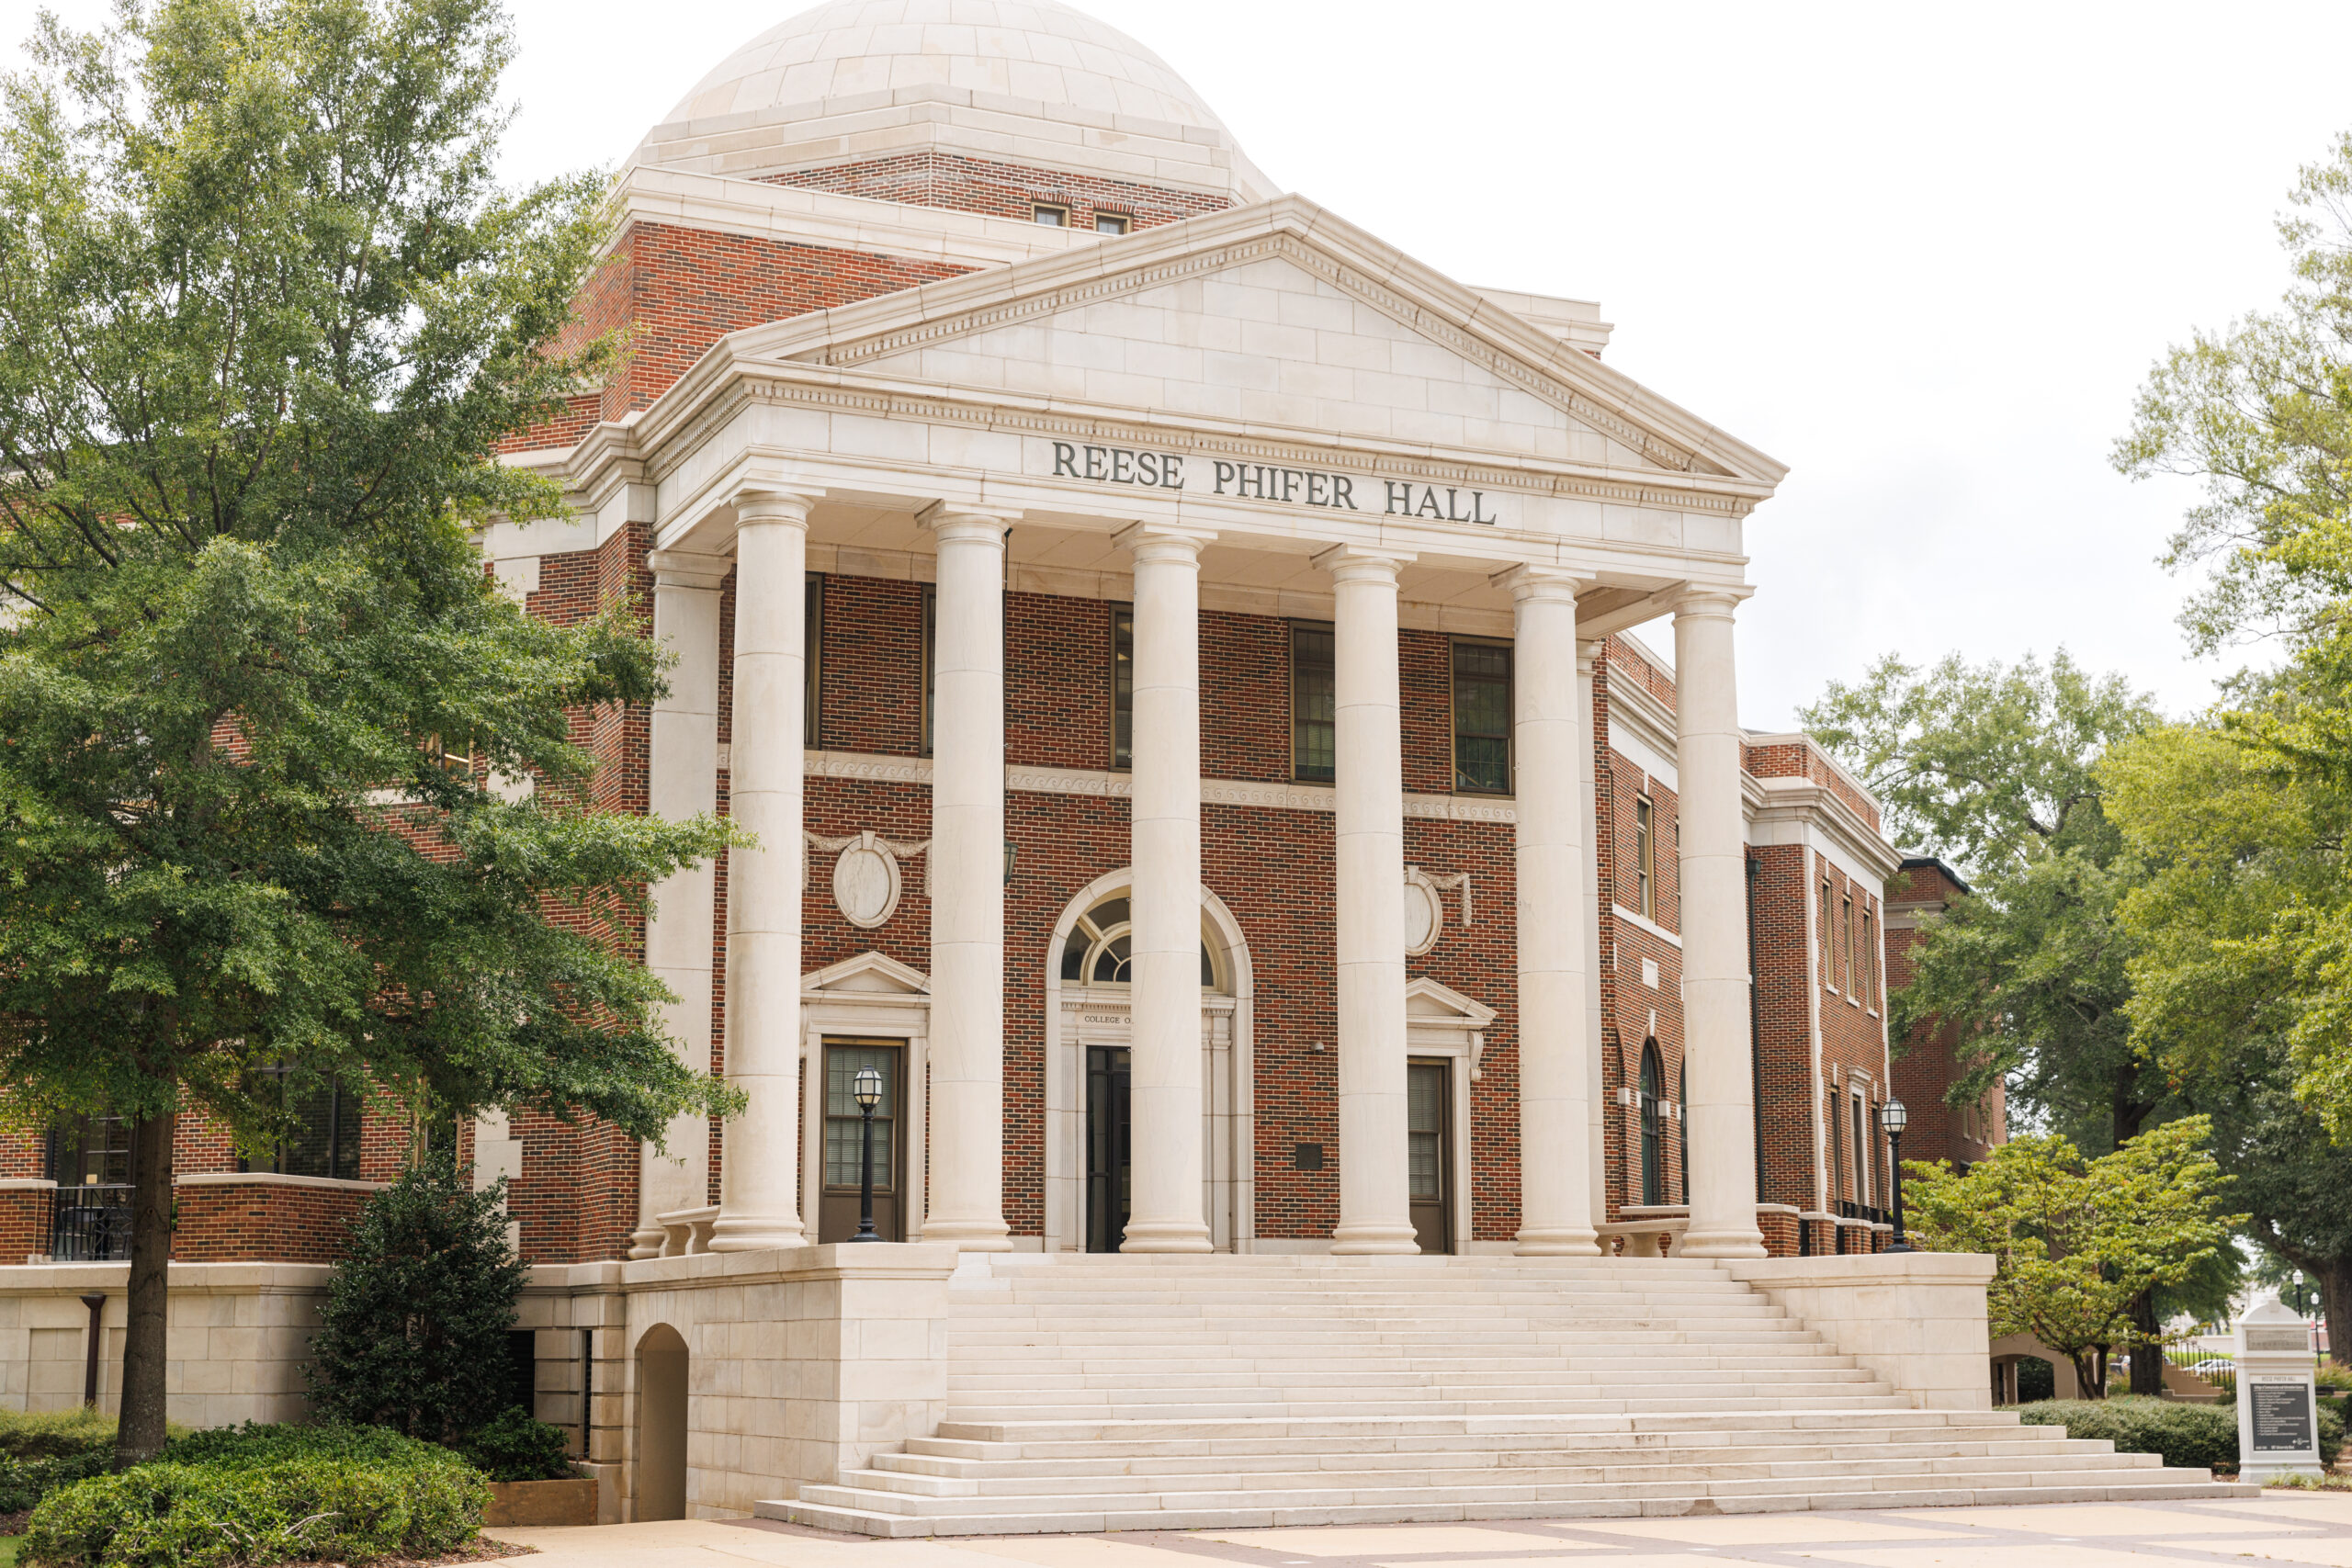 The front of Reese Phifer Hall at The University of Alabama